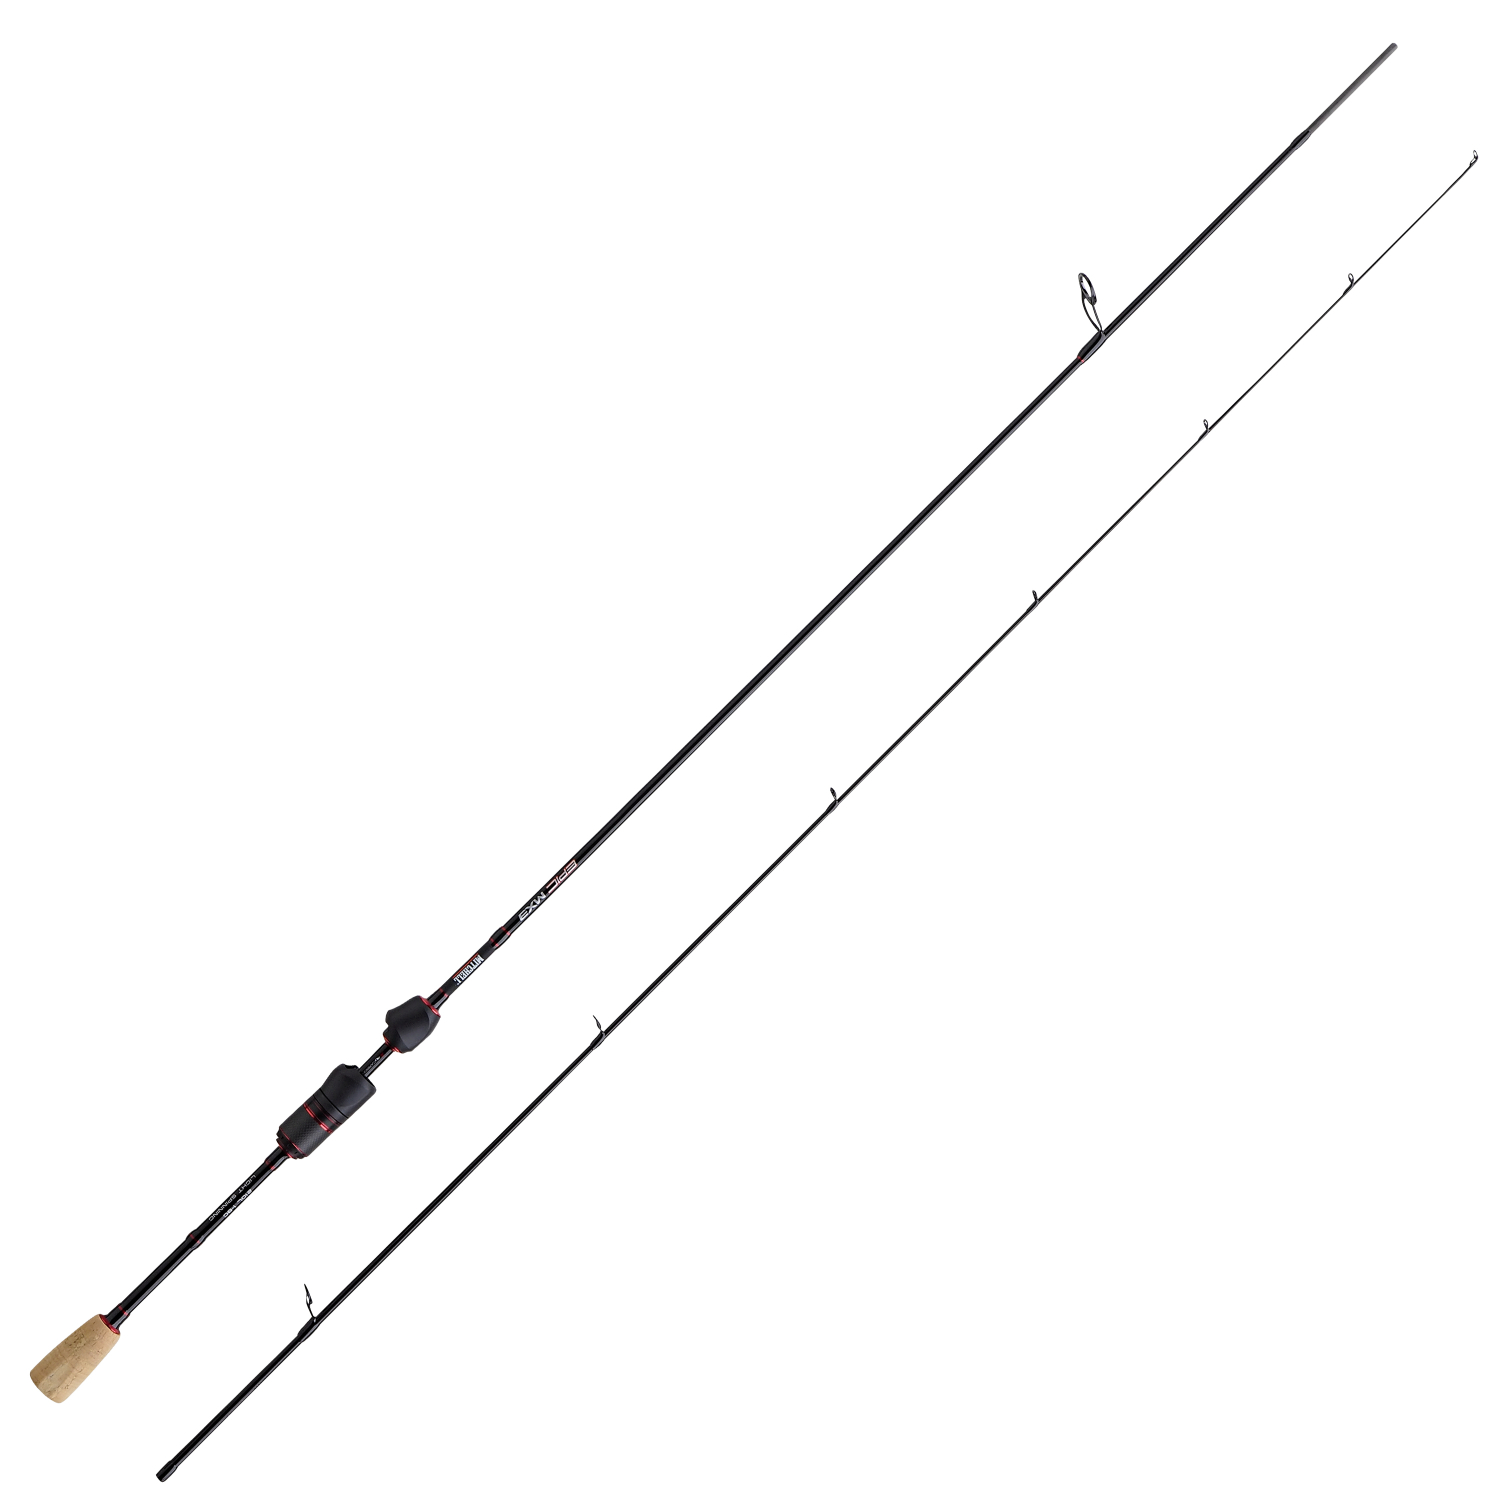 https://images.askari-sport.com/en/product/1/large/mitchell-sectioned-rod-epic-mx3-spinning.jpg